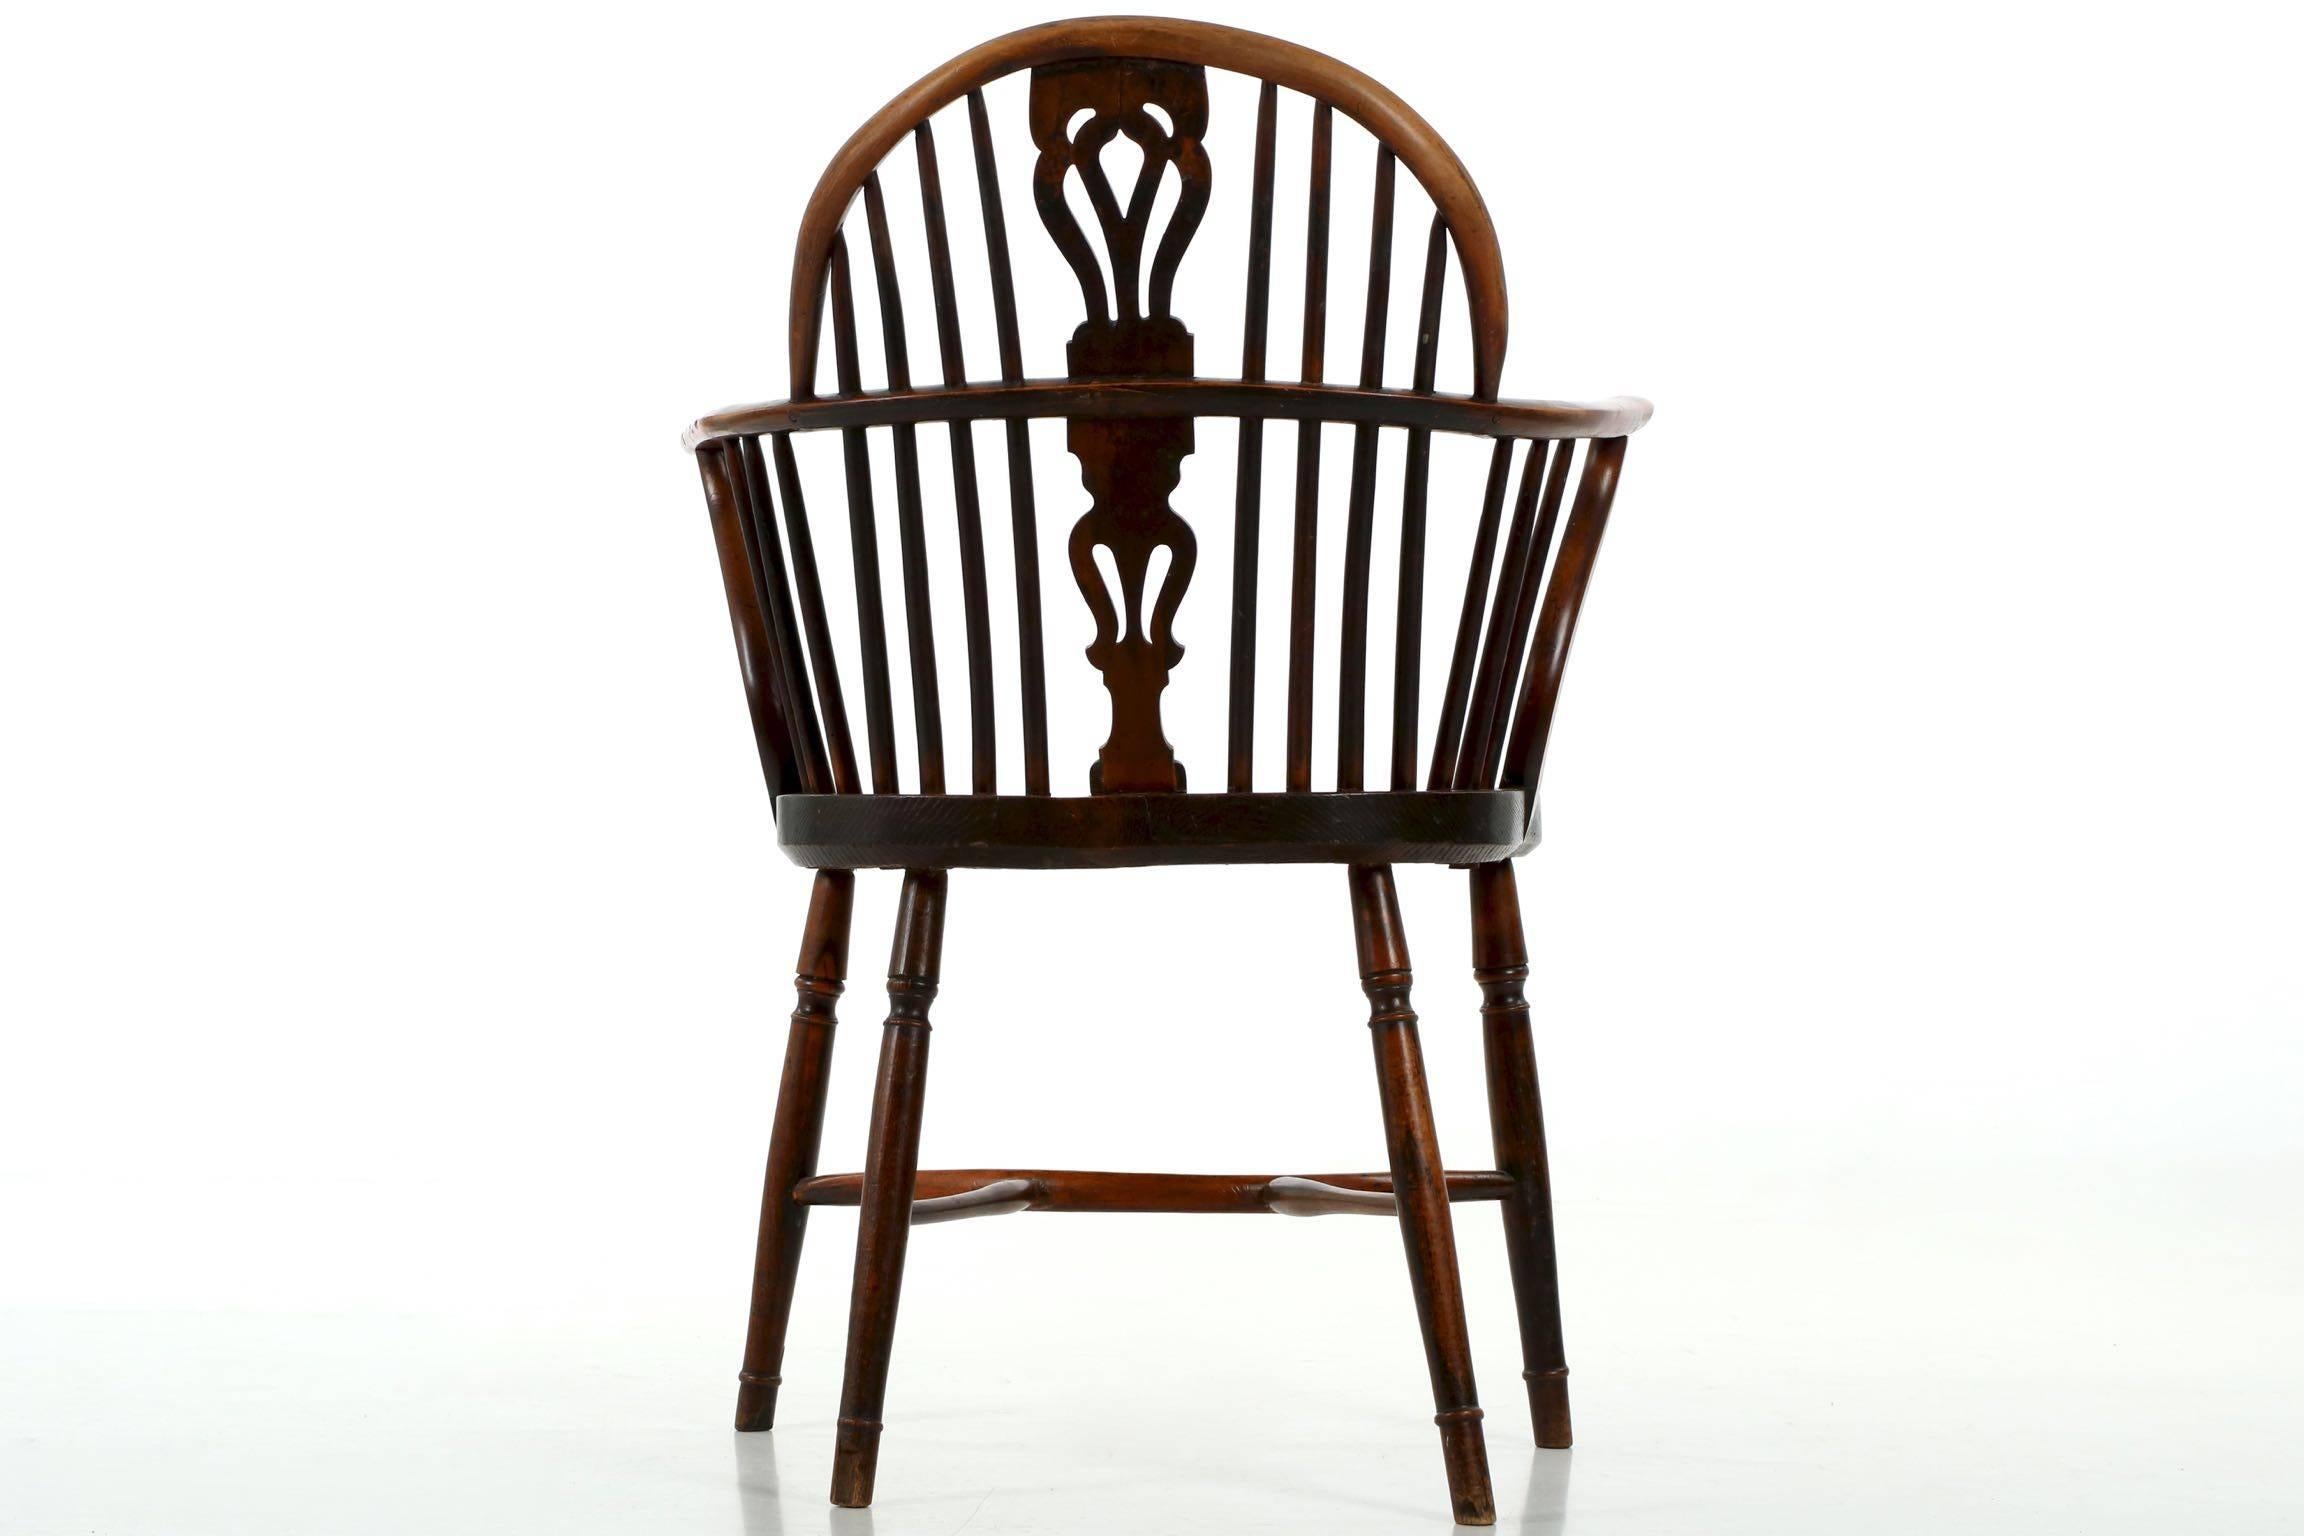 19th Century Fine English Yew and Elm Antique Windsor Armchair, circa 1810-1840